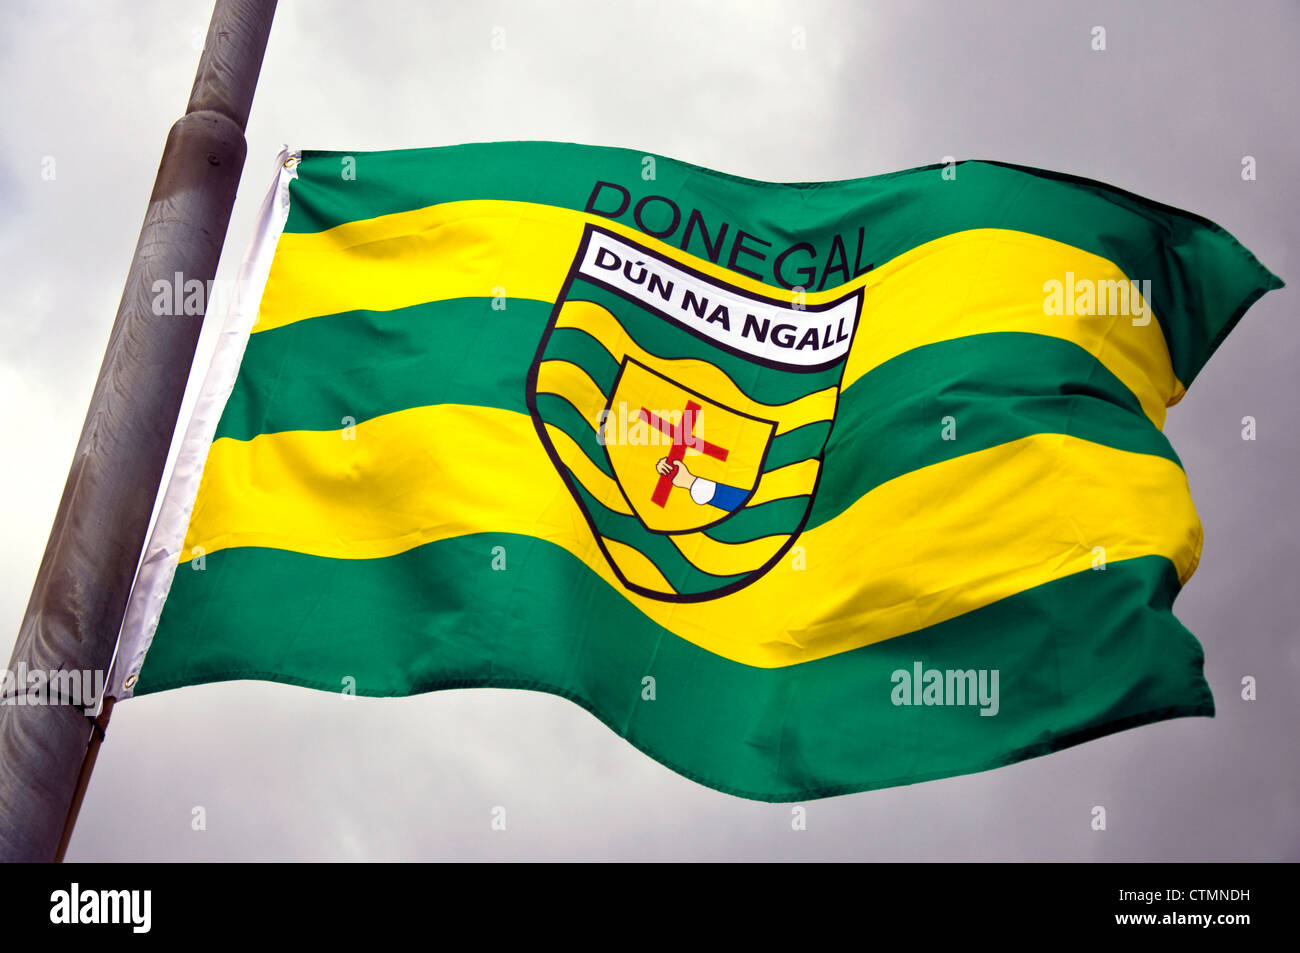 Flag of Donegal or Dun na nGall Irish county in Gaelic language flying from a lampost Stock Photo